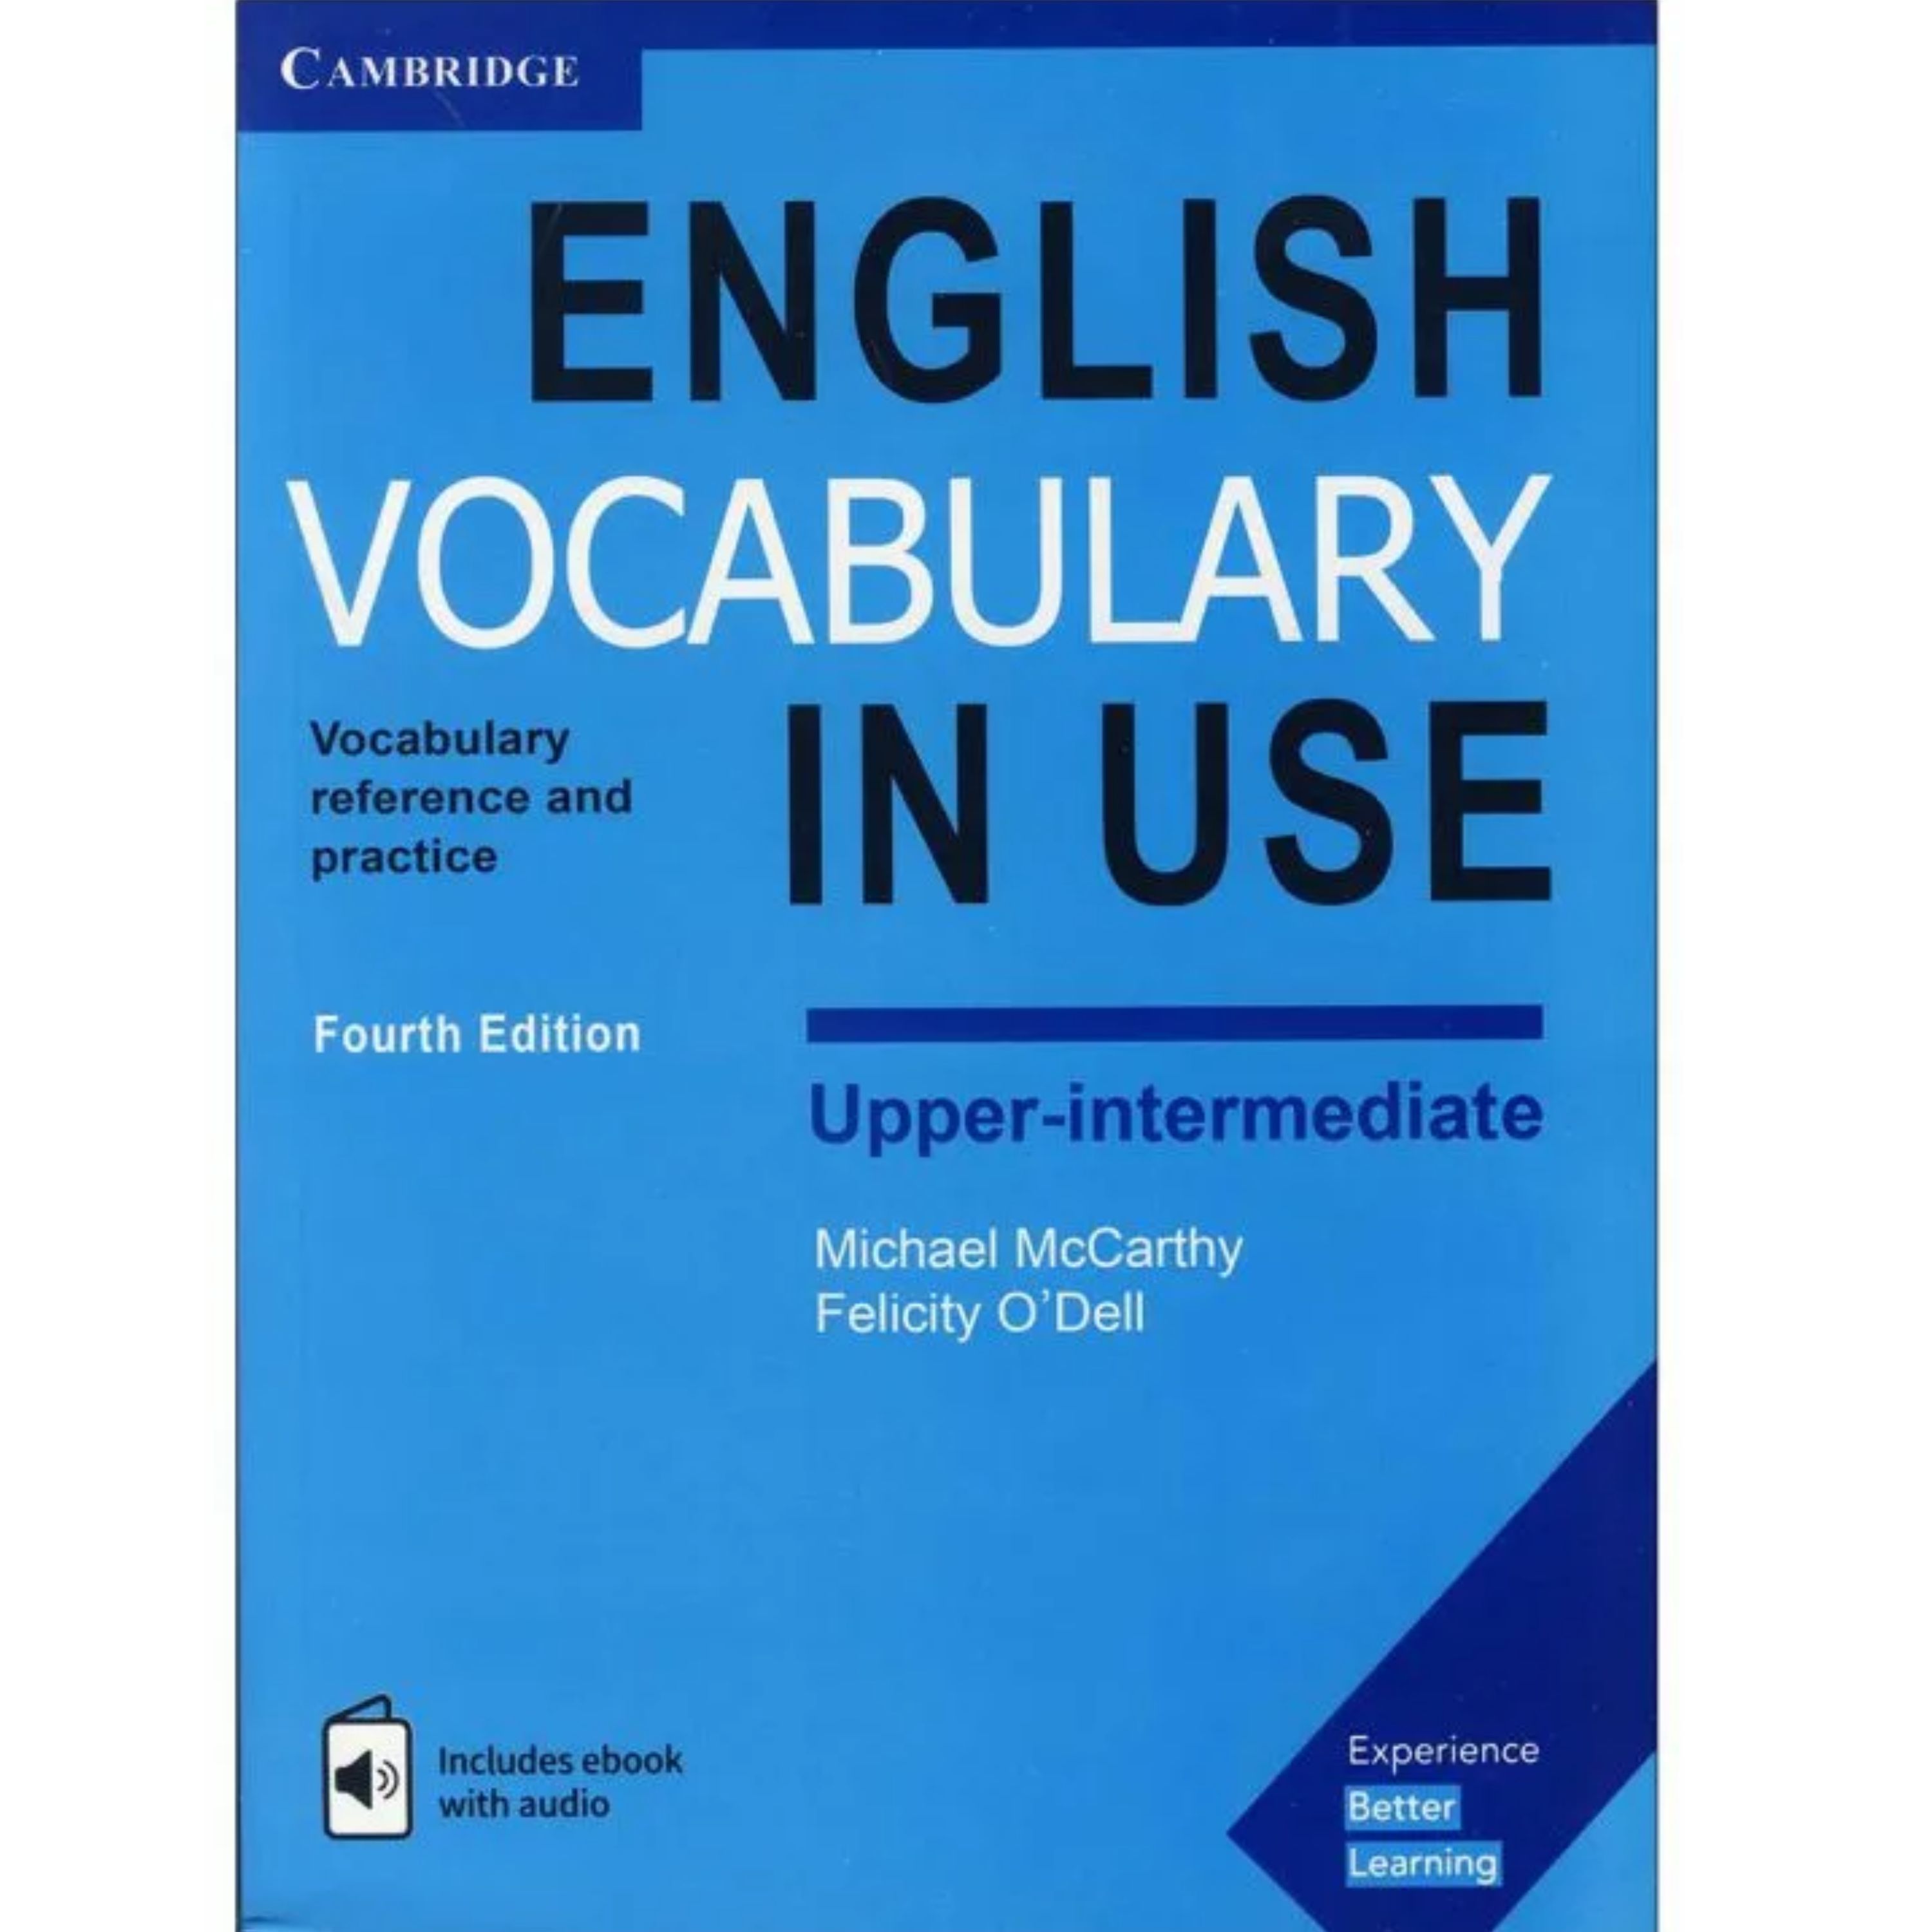 Test english vocabulary in use. Vocabulary in use pre Intermediate and Intermediate. English Vocabulary in use pre-Intermediate. English Vocabulary in use. Английский Upper Intermediate.